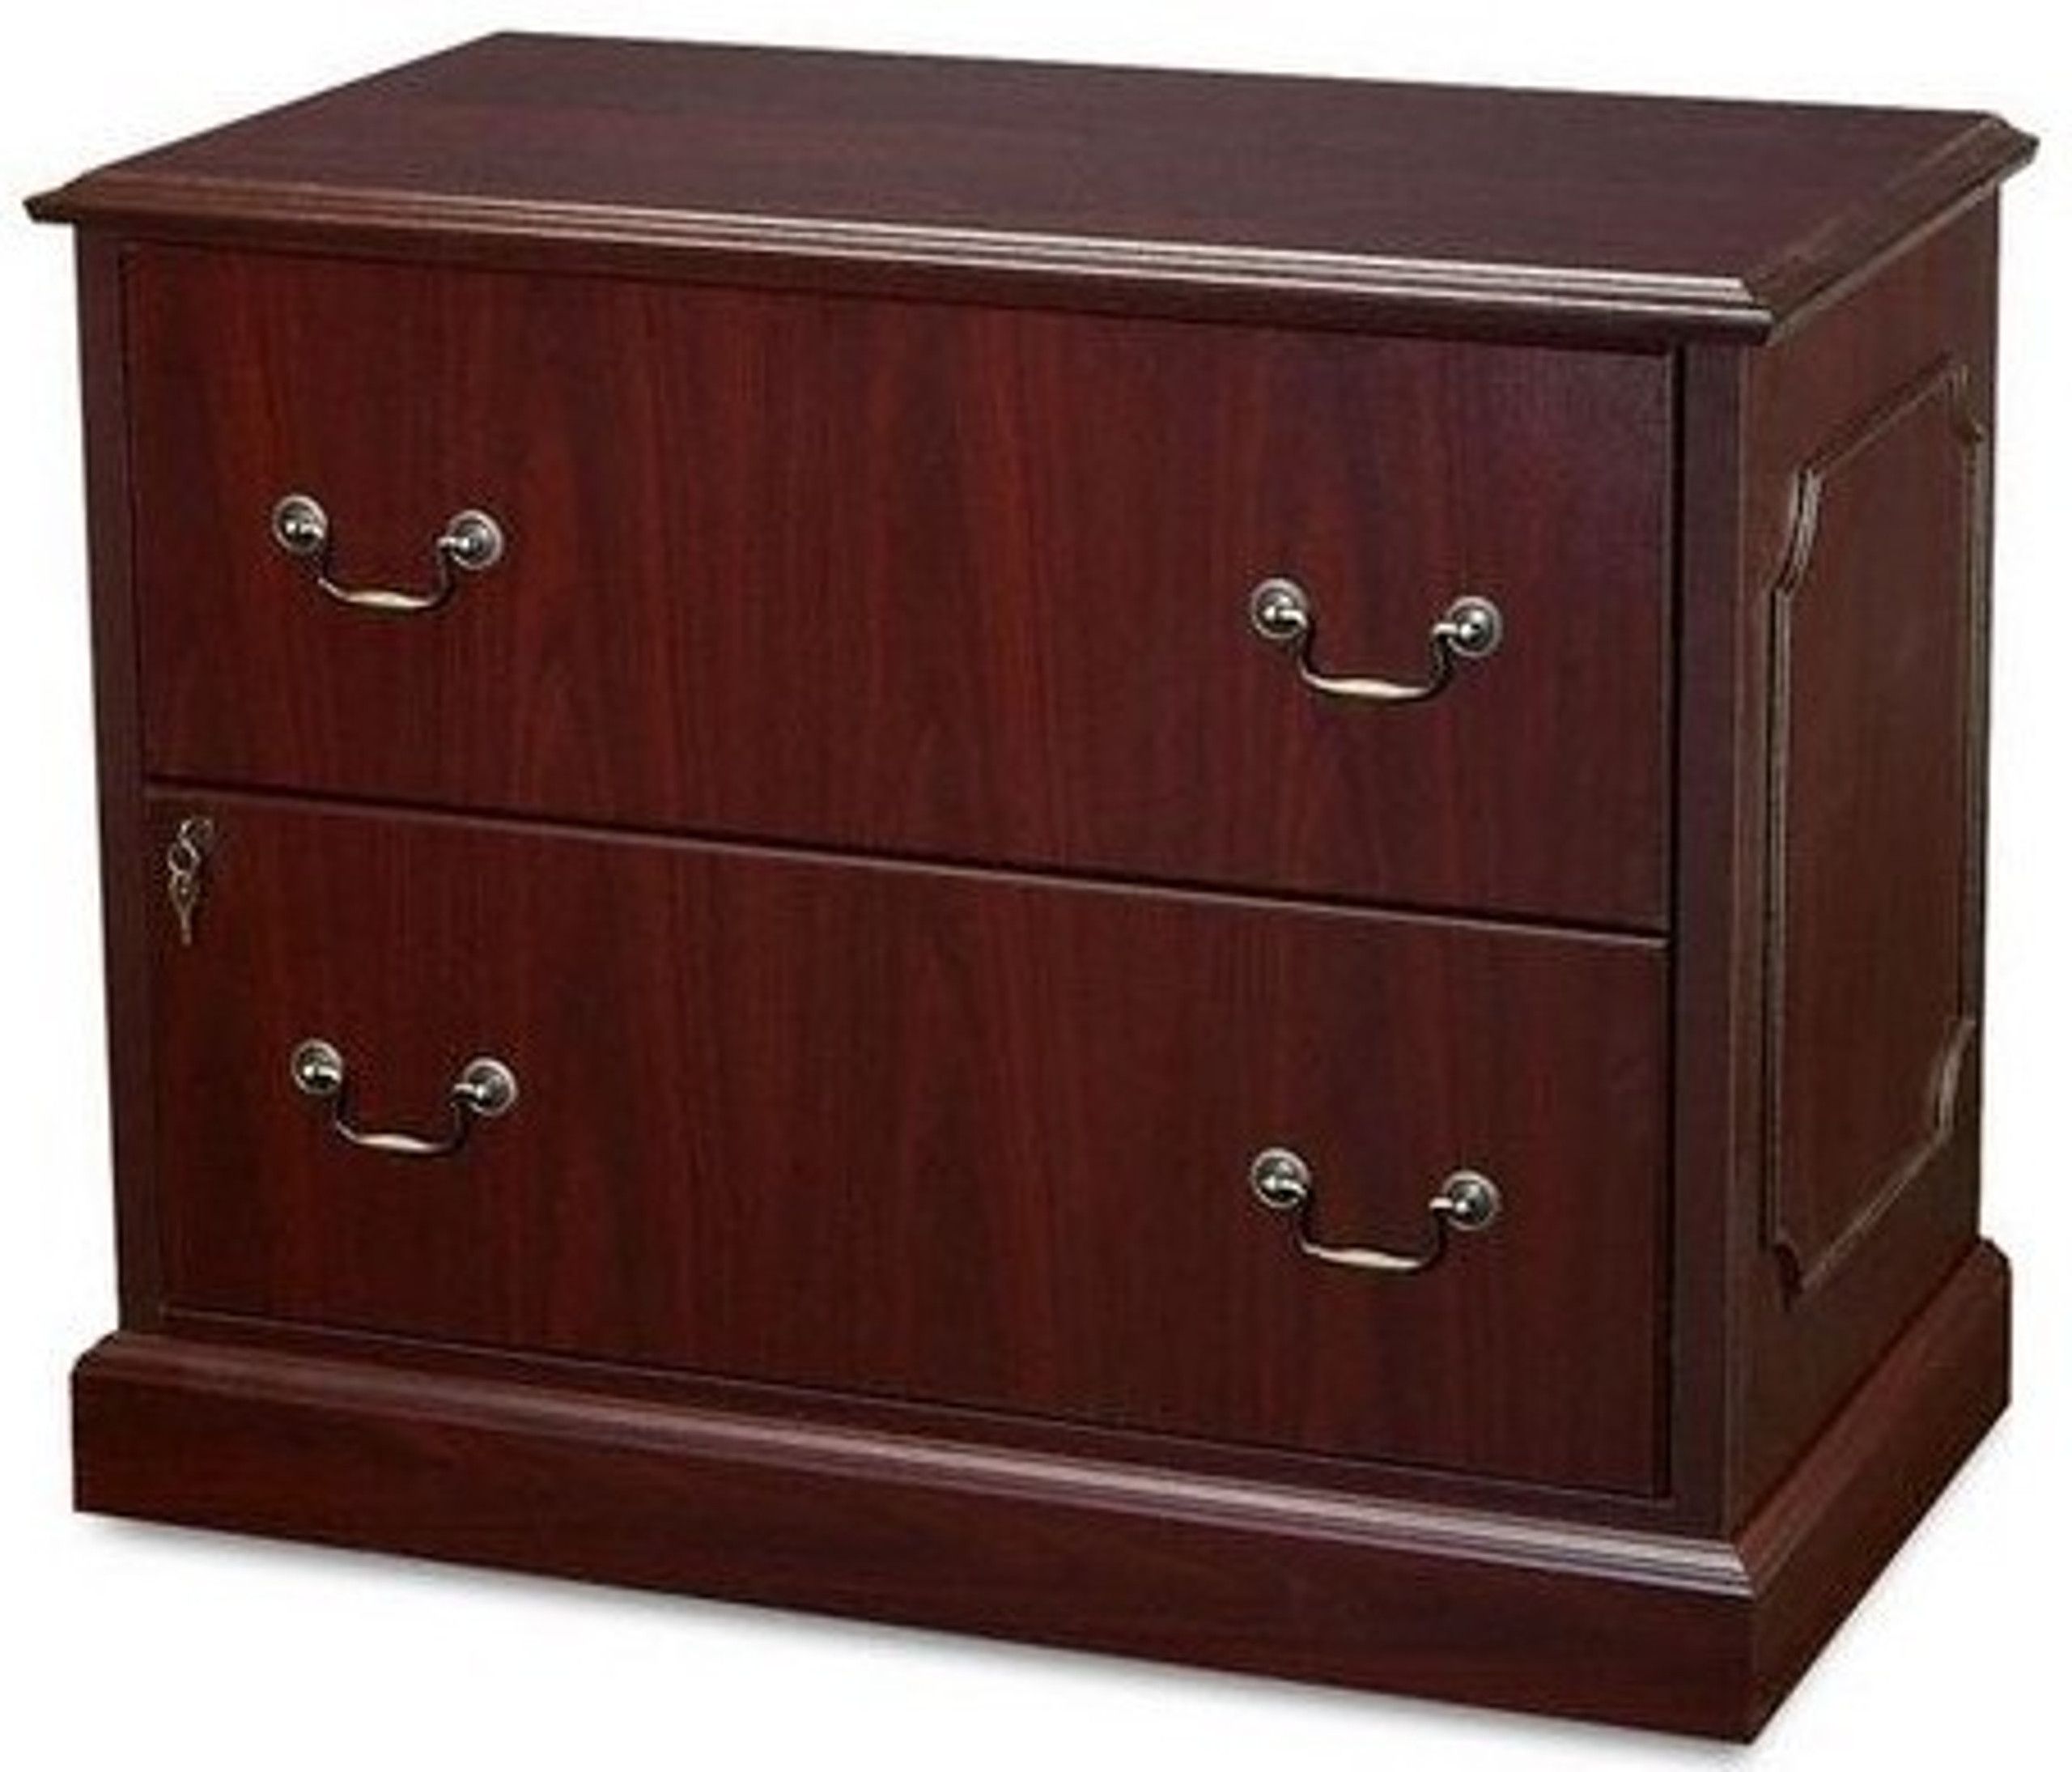 [%wood Filing Cabinet – Hon 2 Drawer Laminate Wood Filing Cabinet [105104] In Most Recent Wood Cabinet With Drawers|wood Cabinet With Drawers For Famous Wood Filing Cabinet – Hon 2 Drawer Laminate Wood Filing Cabinet [105104]|widely Used Wood Cabinet With Drawers Within Wood Filing Cabinet – Hon 2 Drawer Laminate Wood Filing Cabinet [105104]|2020 Wood Filing Cabinet – Hon 2 Drawer Laminate Wood Filing Cabinet [105104] Pertaining To Wood Cabinet With Drawers%] (View 10 of 15)